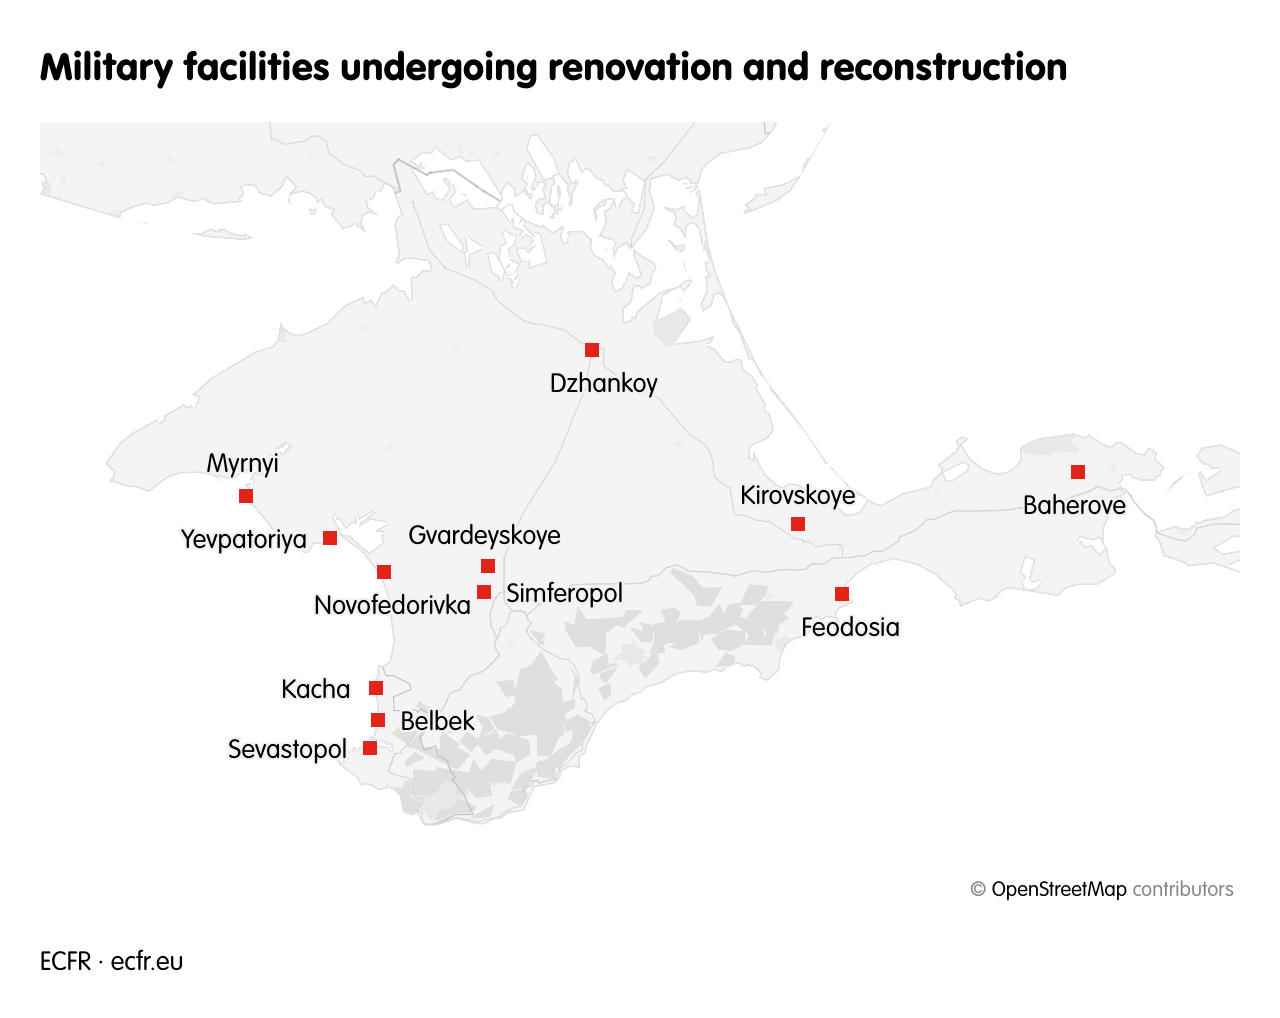 Military facilities undergoing renovation and reconstruction